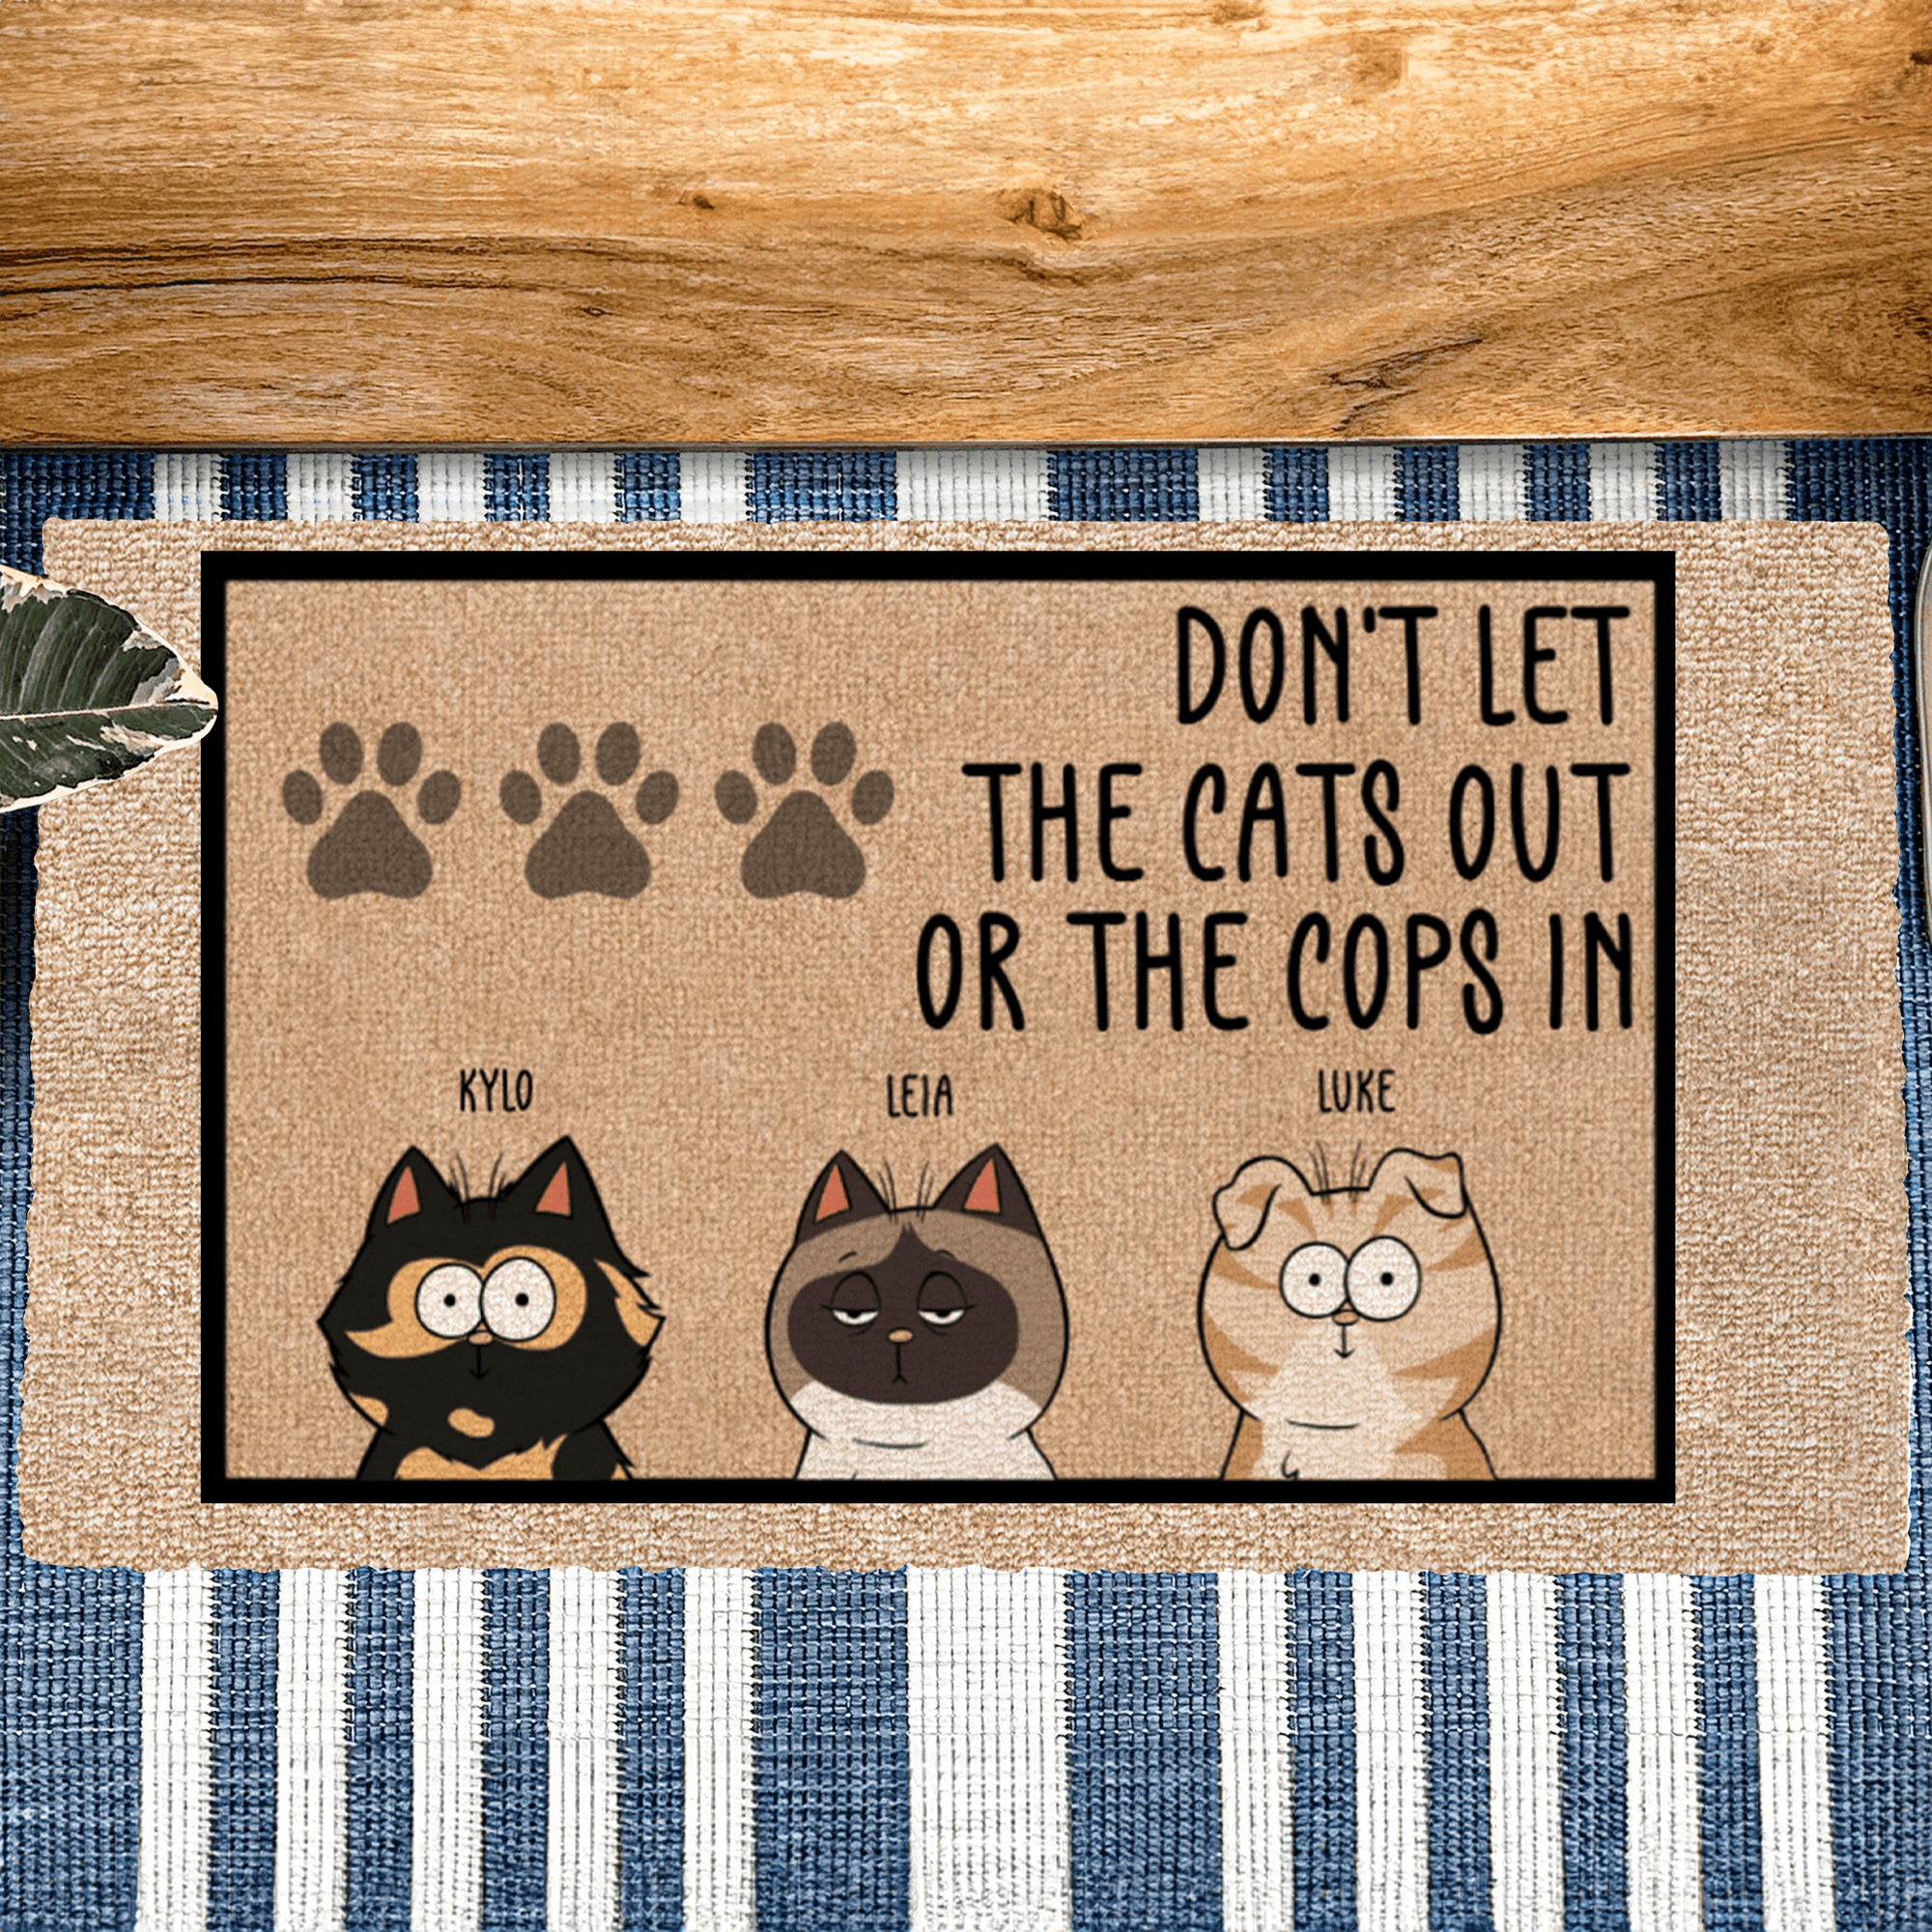 Don't Let The Cats Out Or The Cops In - Personalized Doormat - Birthday, Housewarming, Funny Gift for Homeowners, Friends, Cat Mom, Cat Dad, Cat Lovers, Pet Gifts for Him, Her